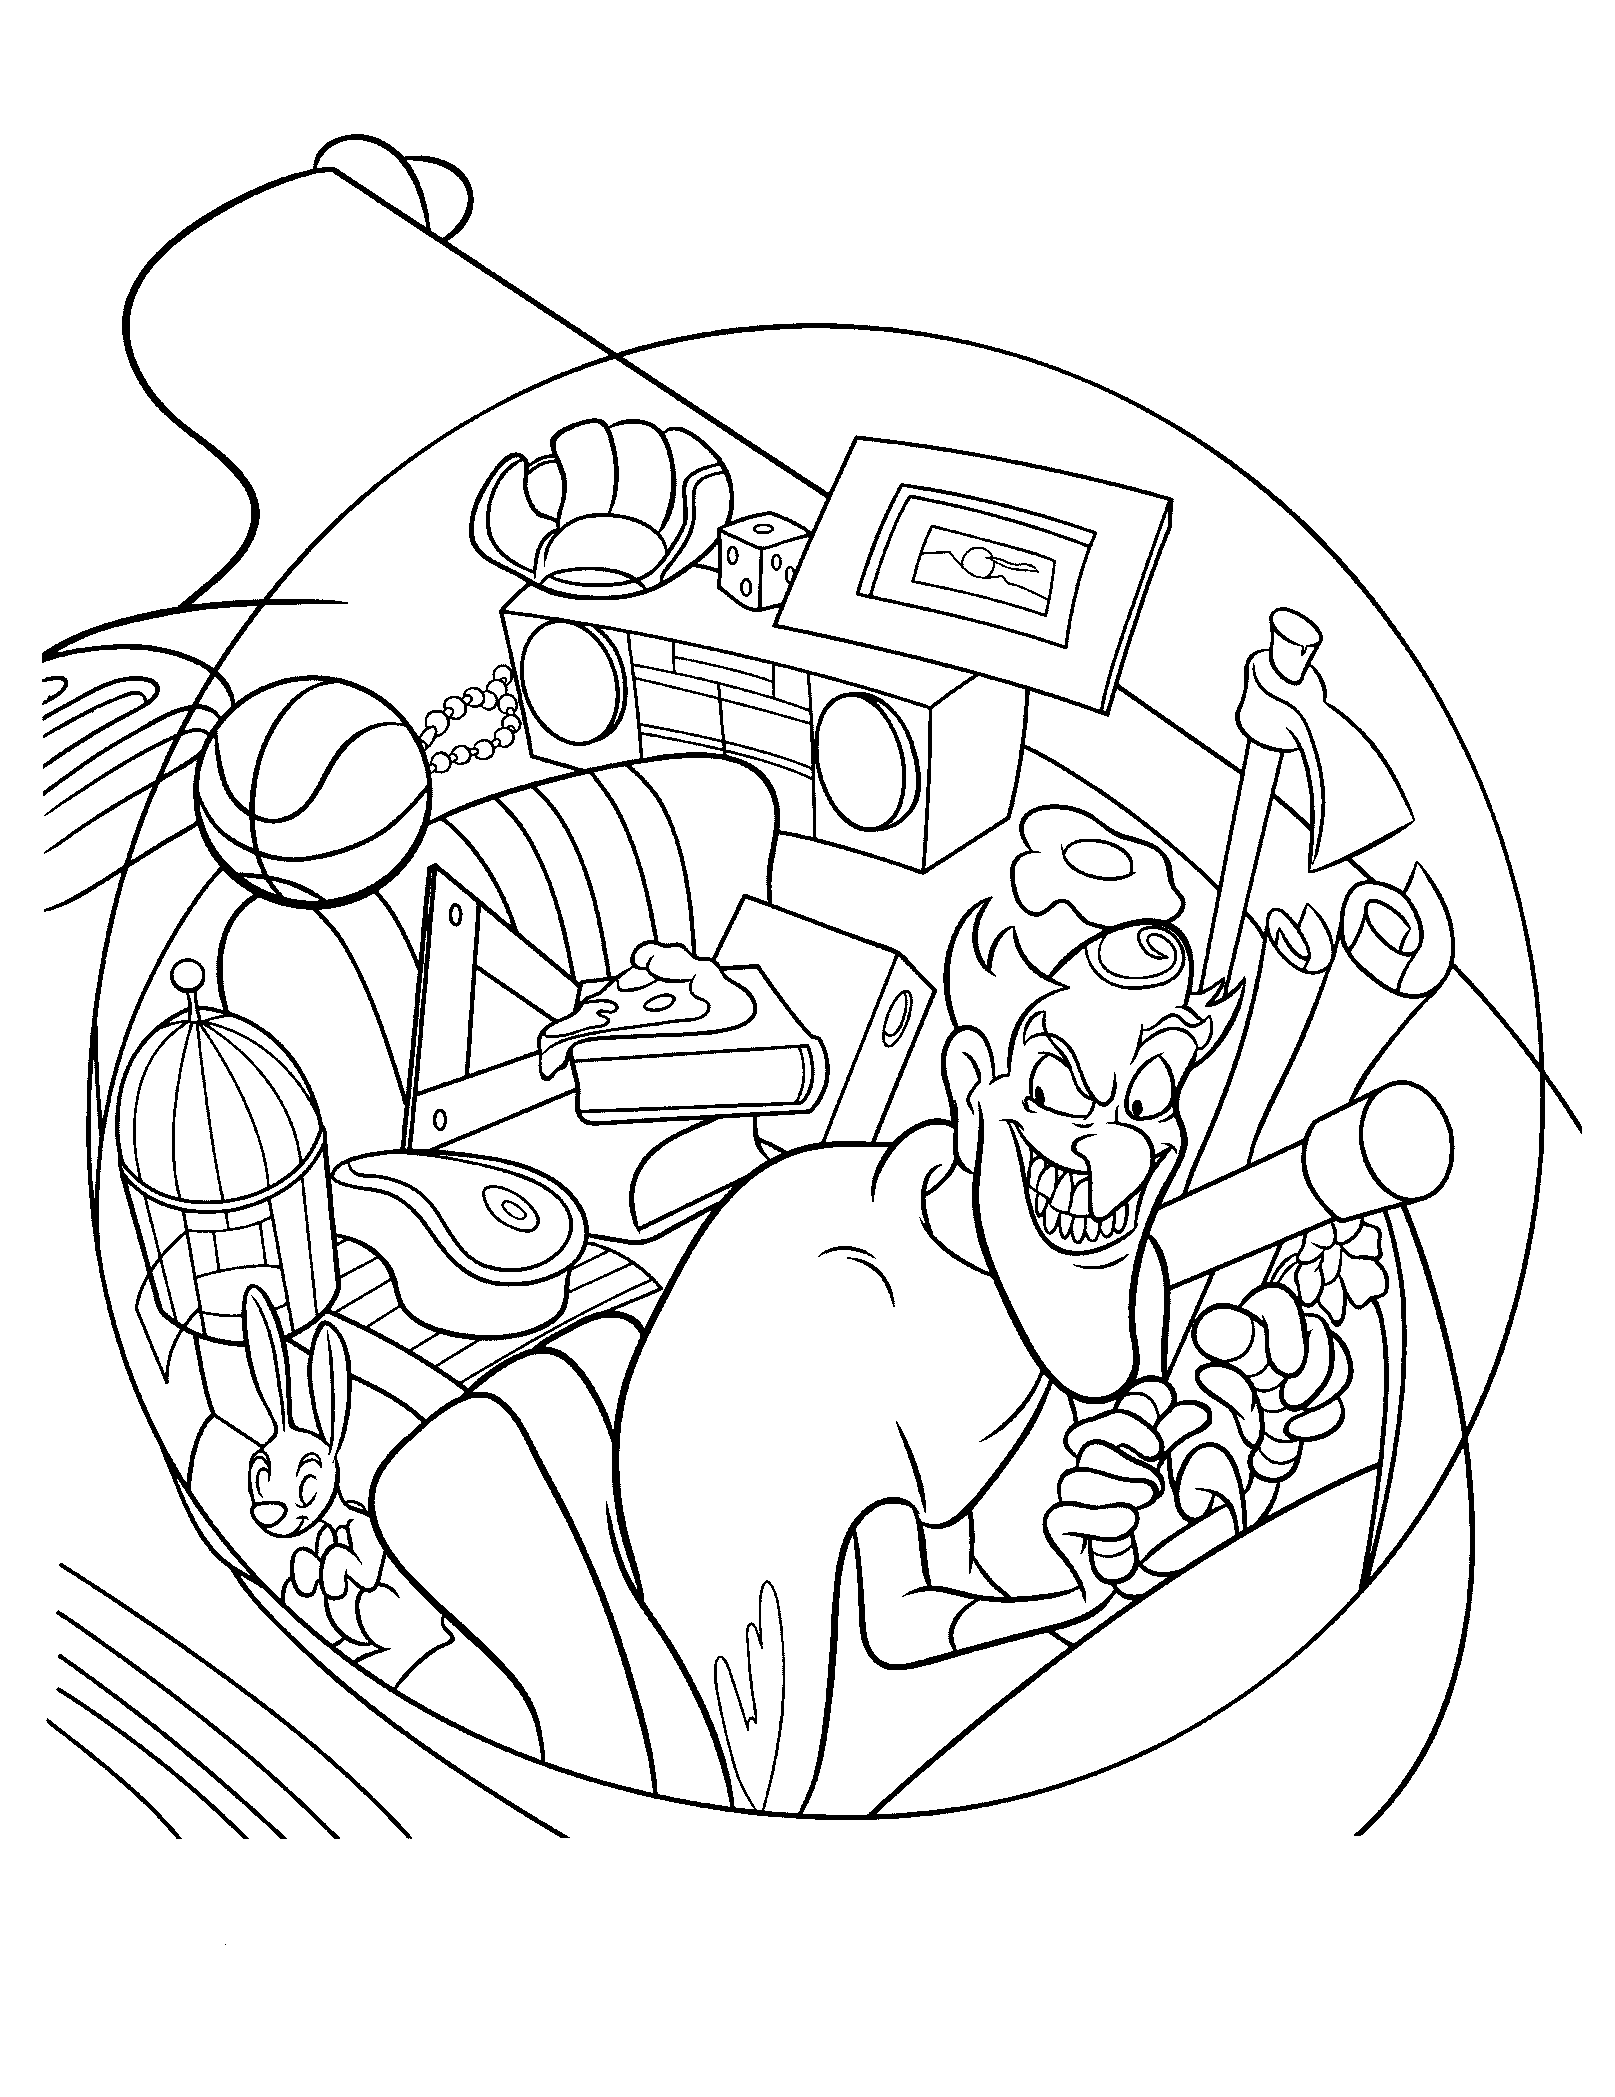 Coloring page - Time Machine